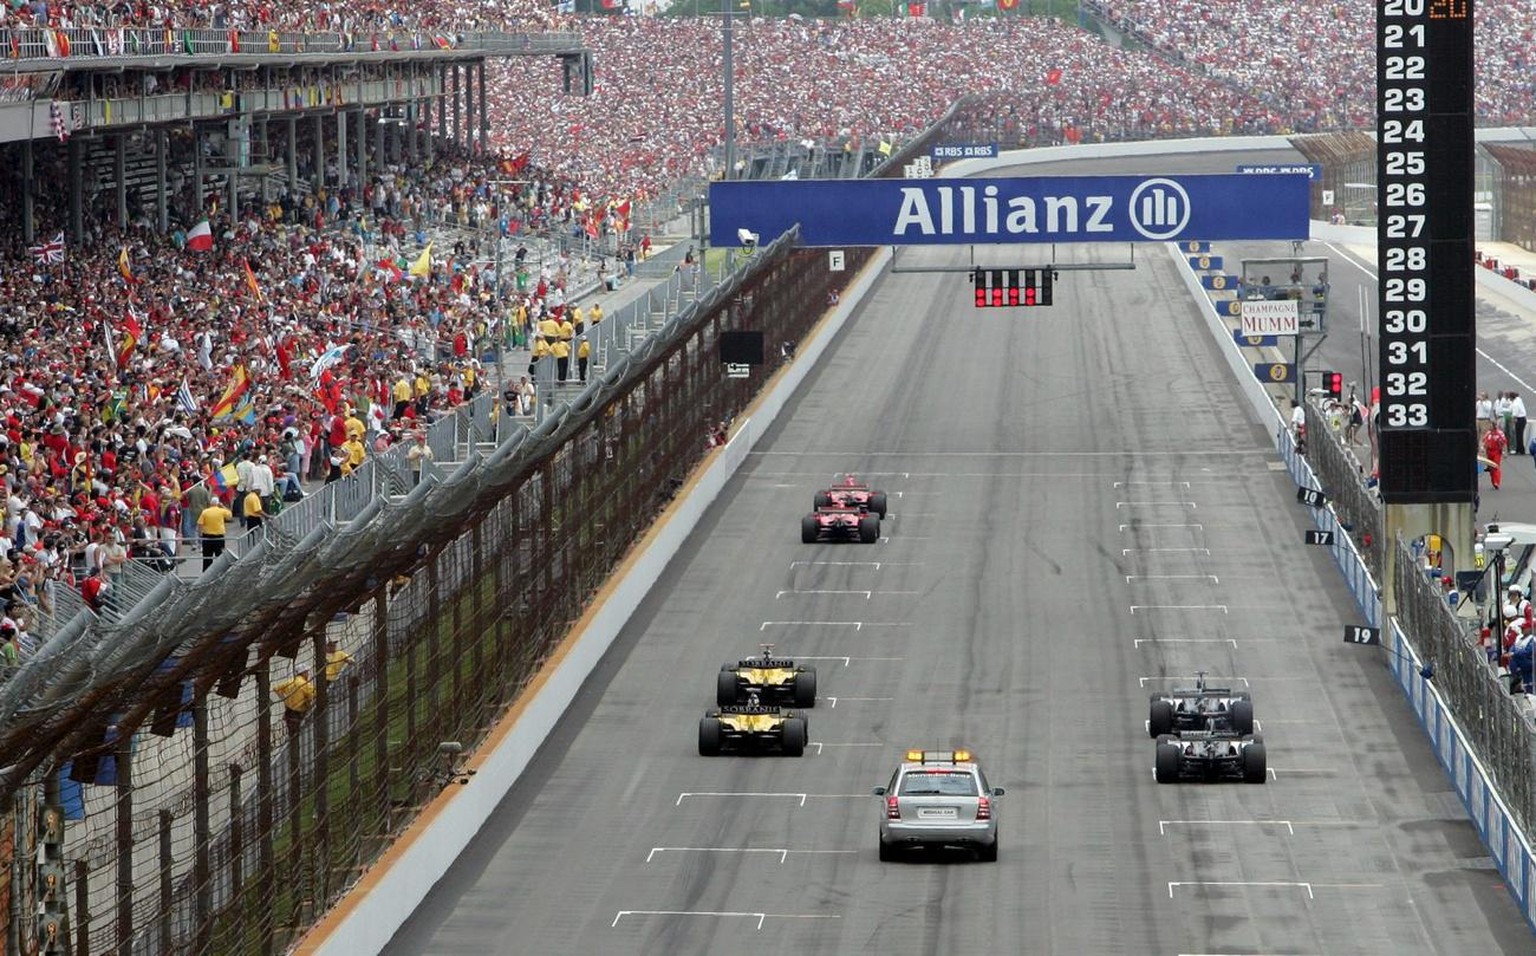 Only Ferarri, Jordan and Minardi teams race cars takes start on the grid at the US Grand Prix at race track in Indianapolis, USA, Sunday 19 June 2005. All Michelin user teams quit the race after the i ...